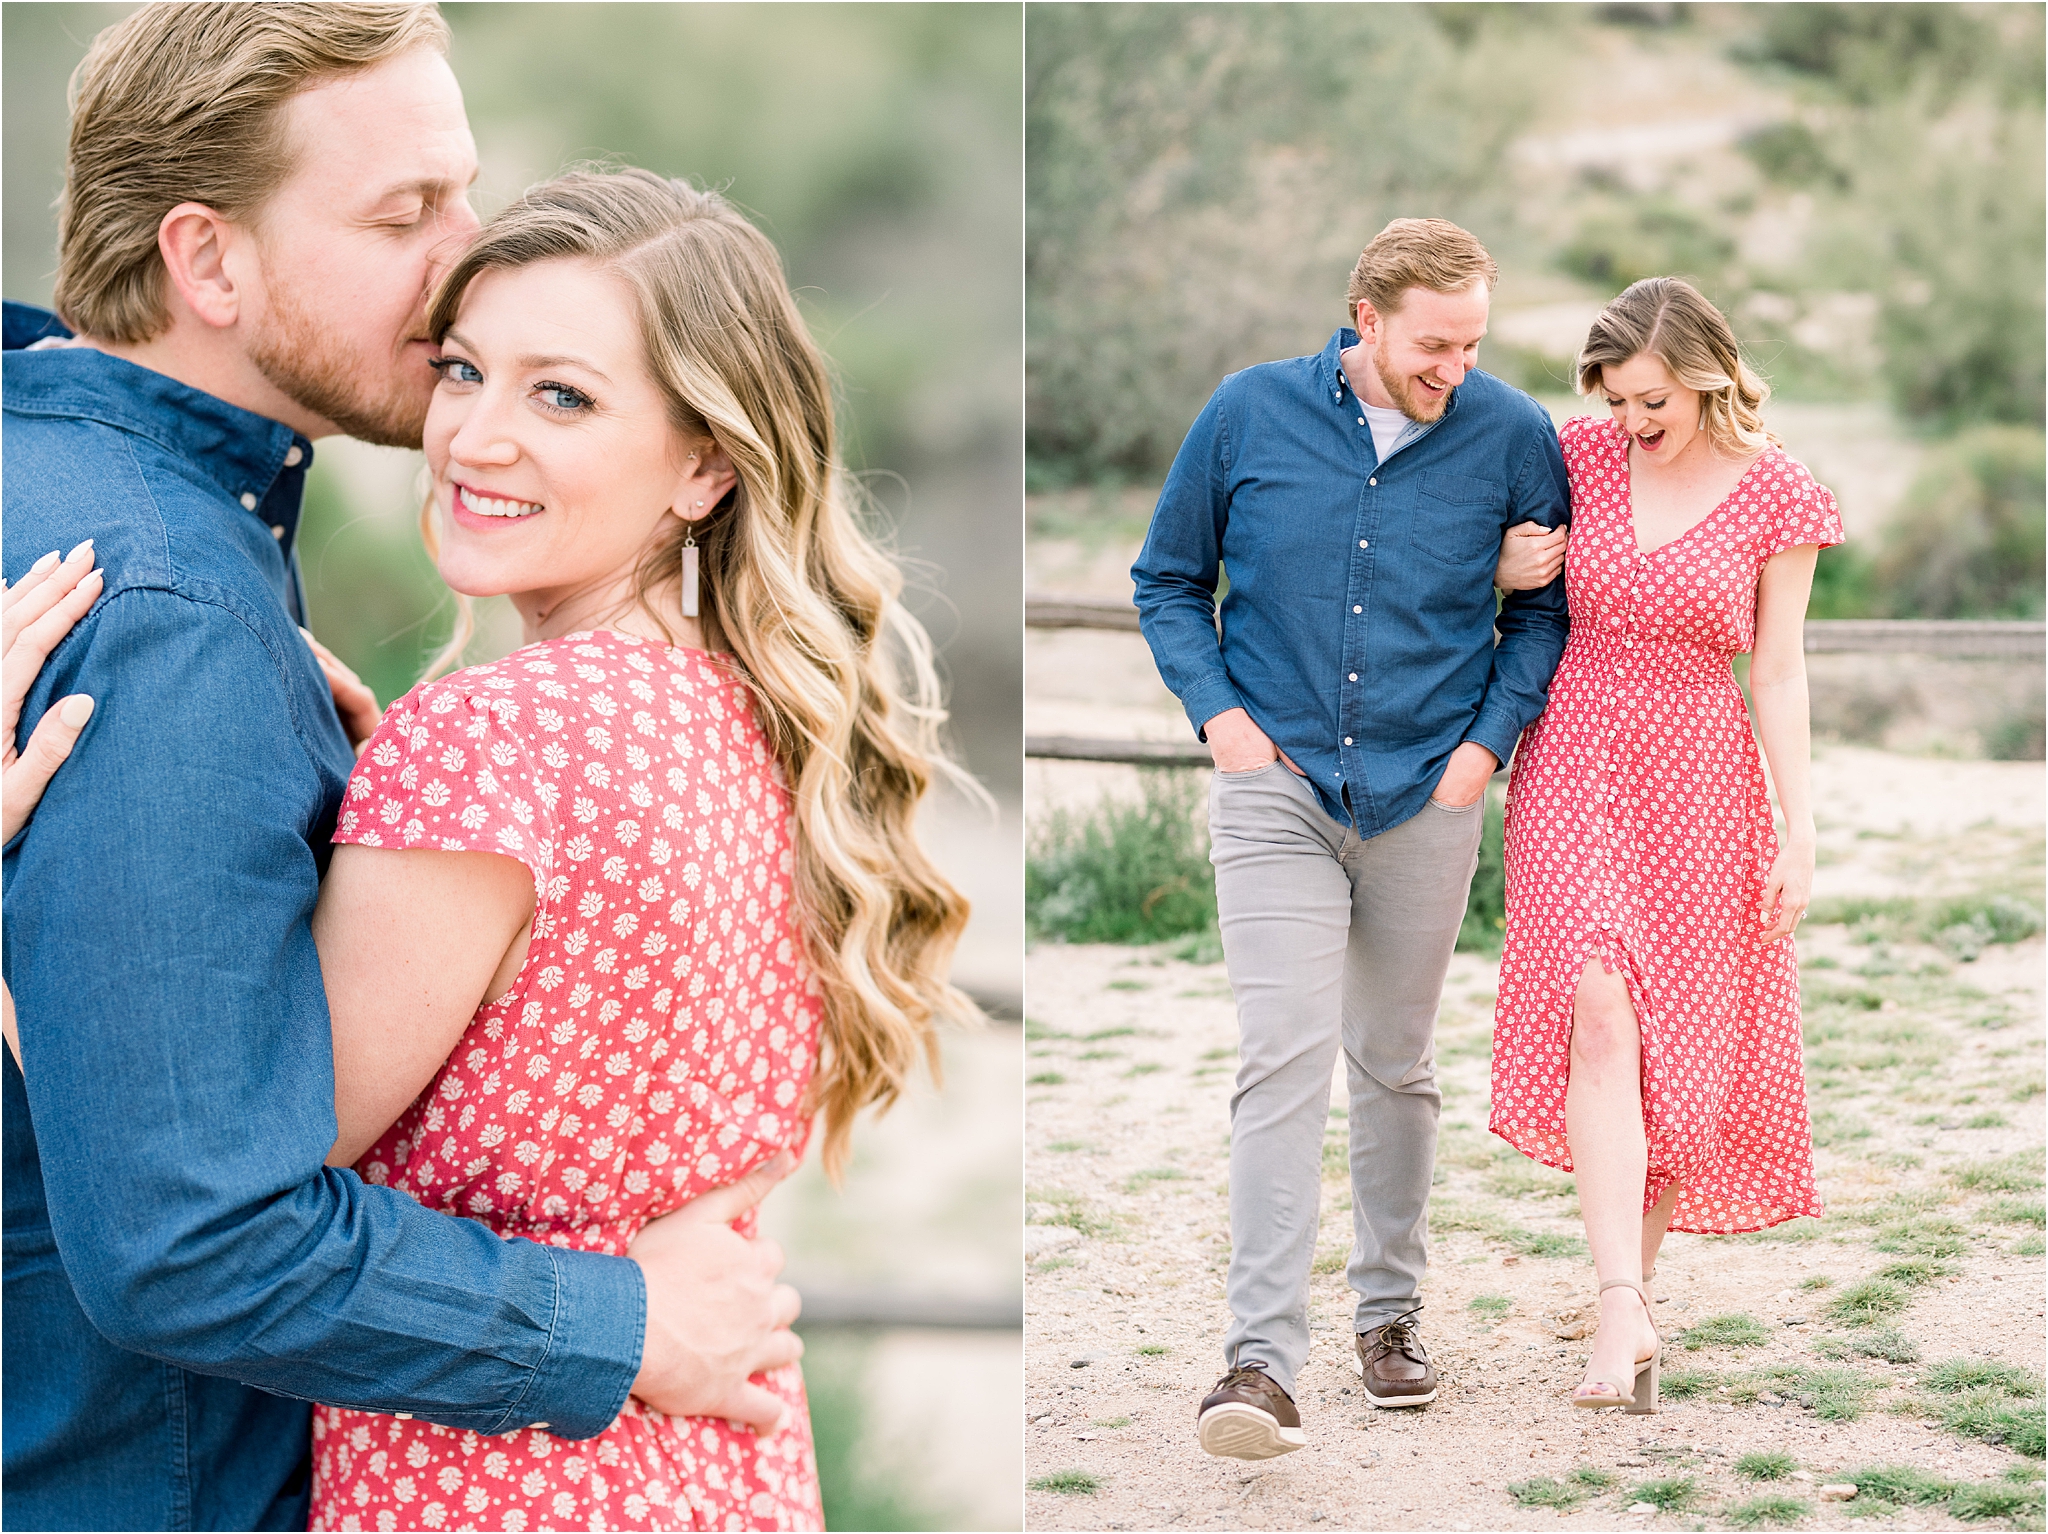 Scorpion Gulch and South Mountain Park engagement photos by Tucson Wedding Photographer Anh and Bryan | West End Photography